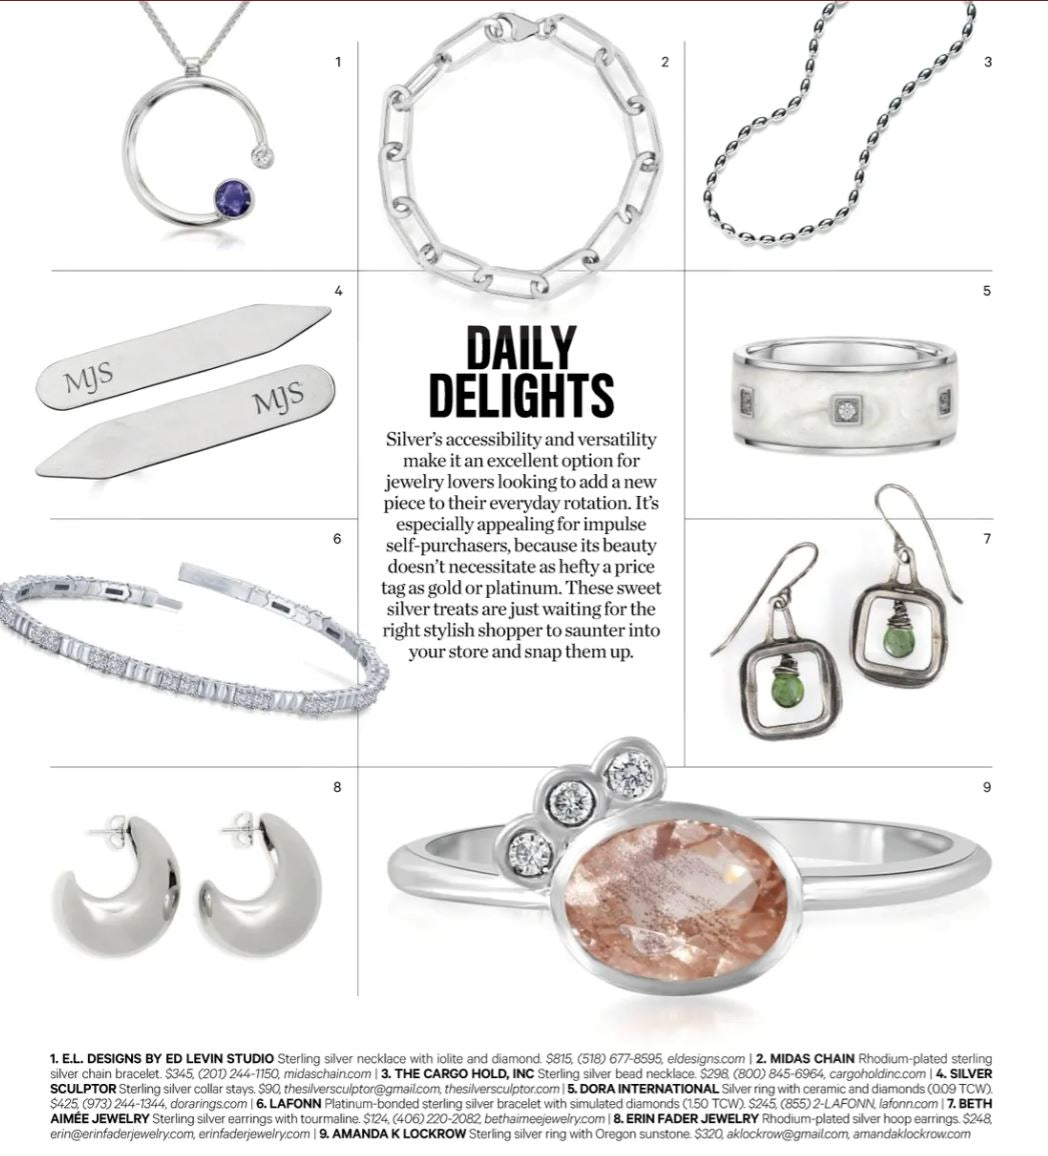 The Sunstone Sophia Ring was featured in this month's INSTORE Magazine!